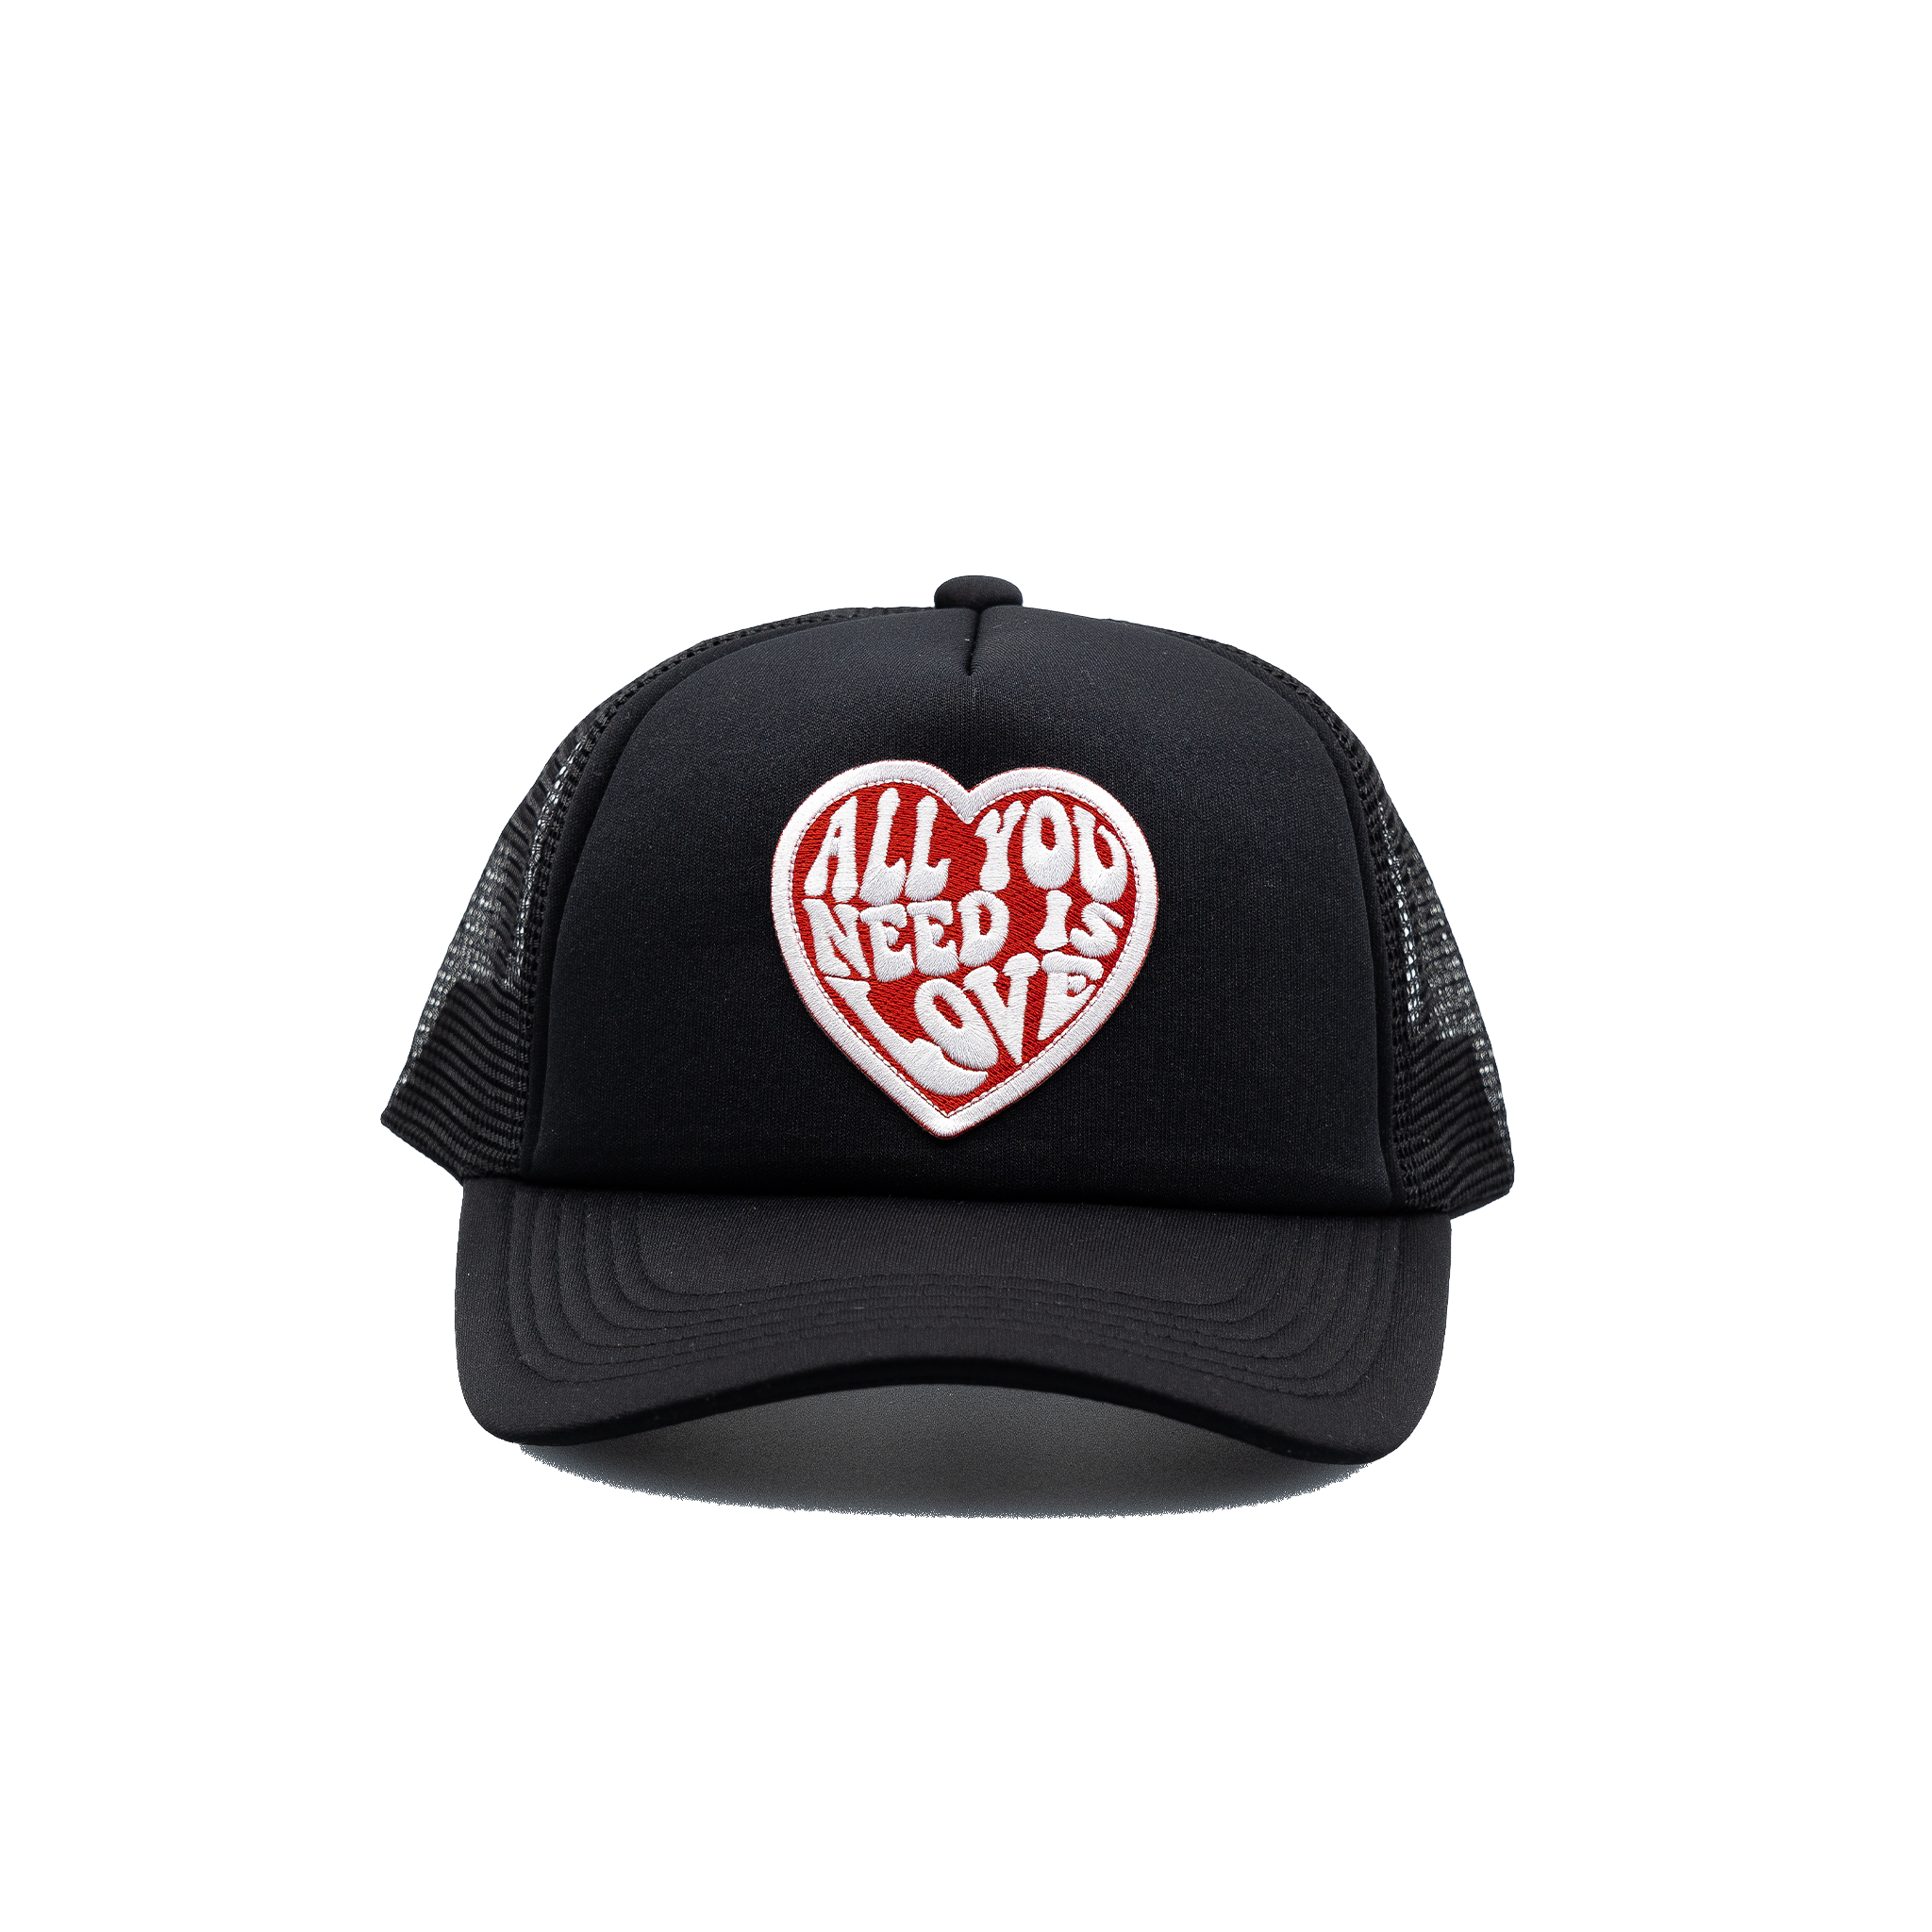 All you Need is Love Trucker Hat solid panel